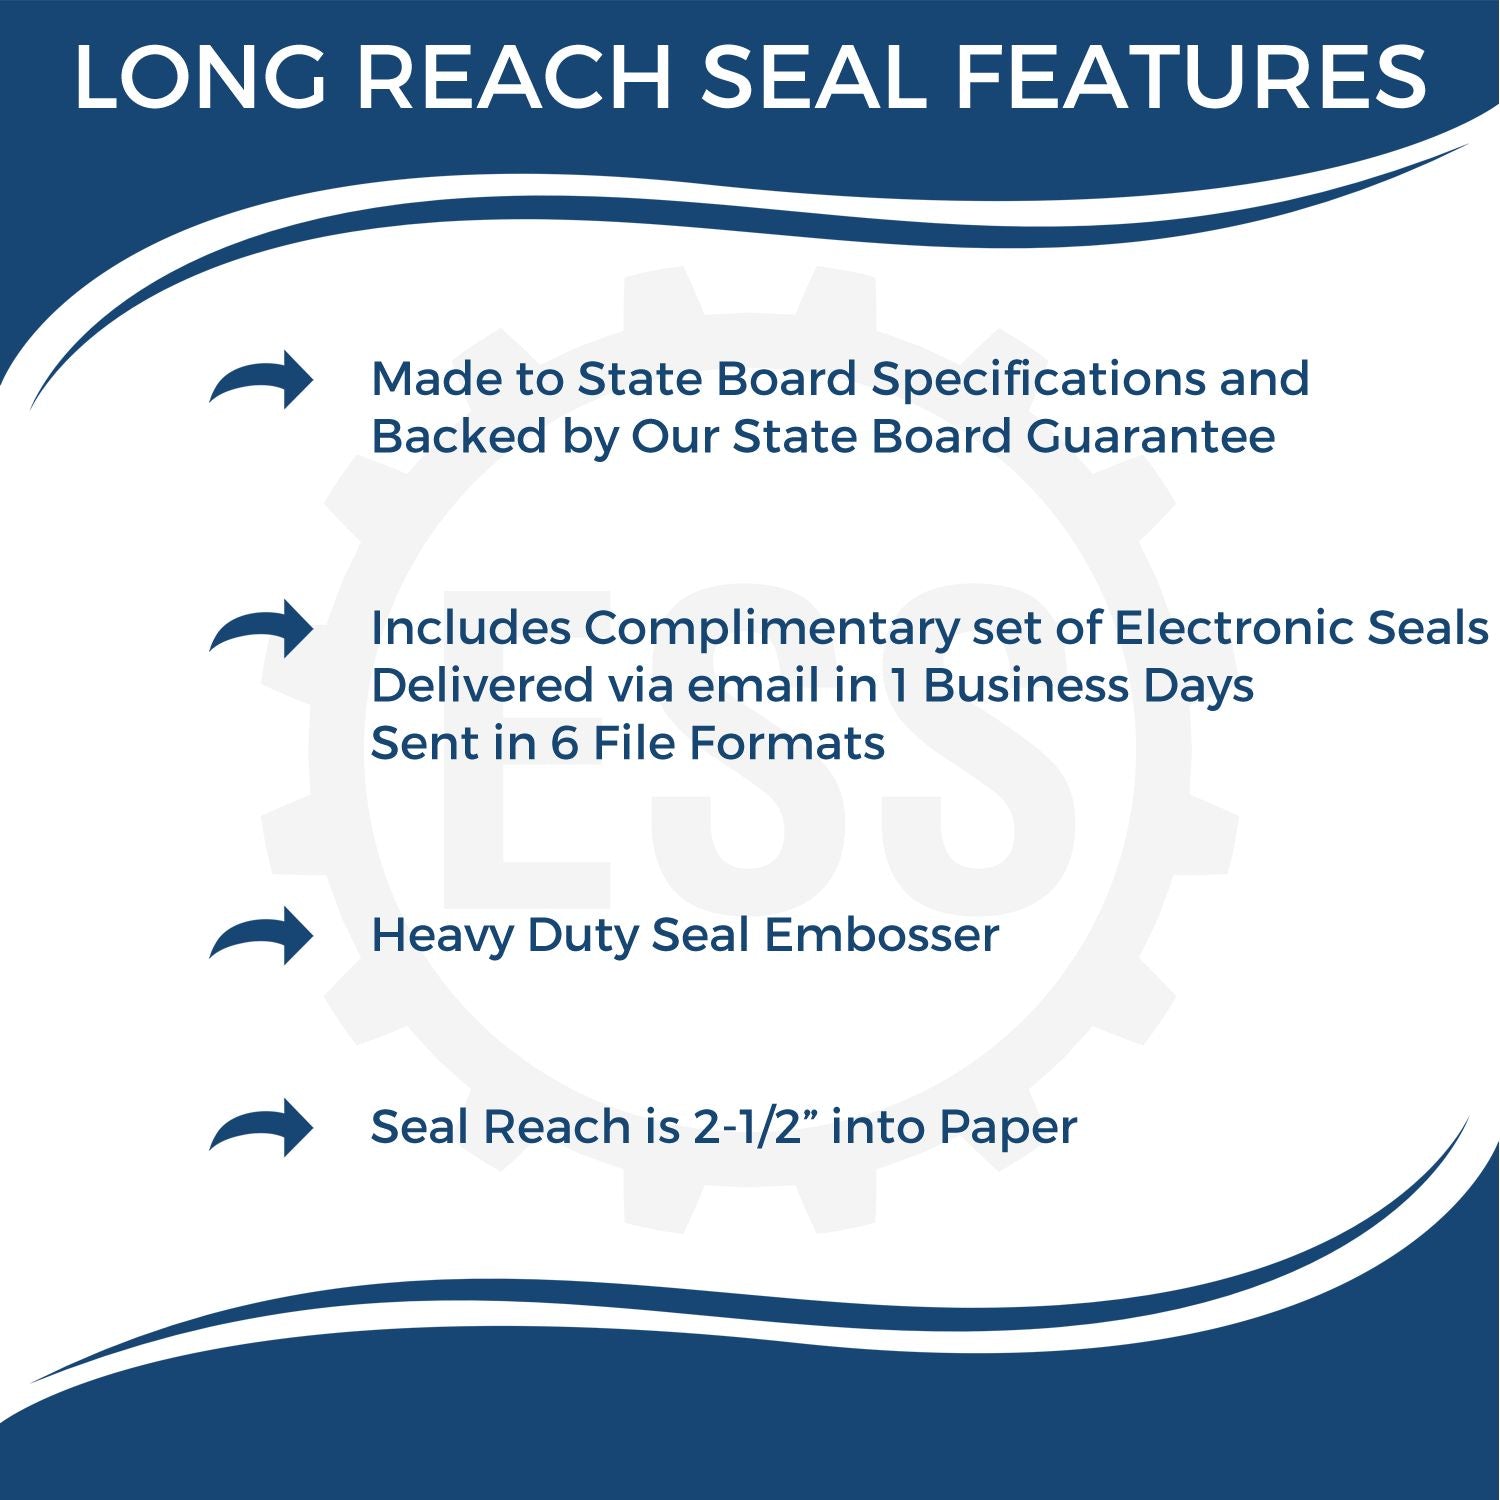 The main image for the Long Reach Maryland PE Seal depicting a sample of the imprint and electronic files